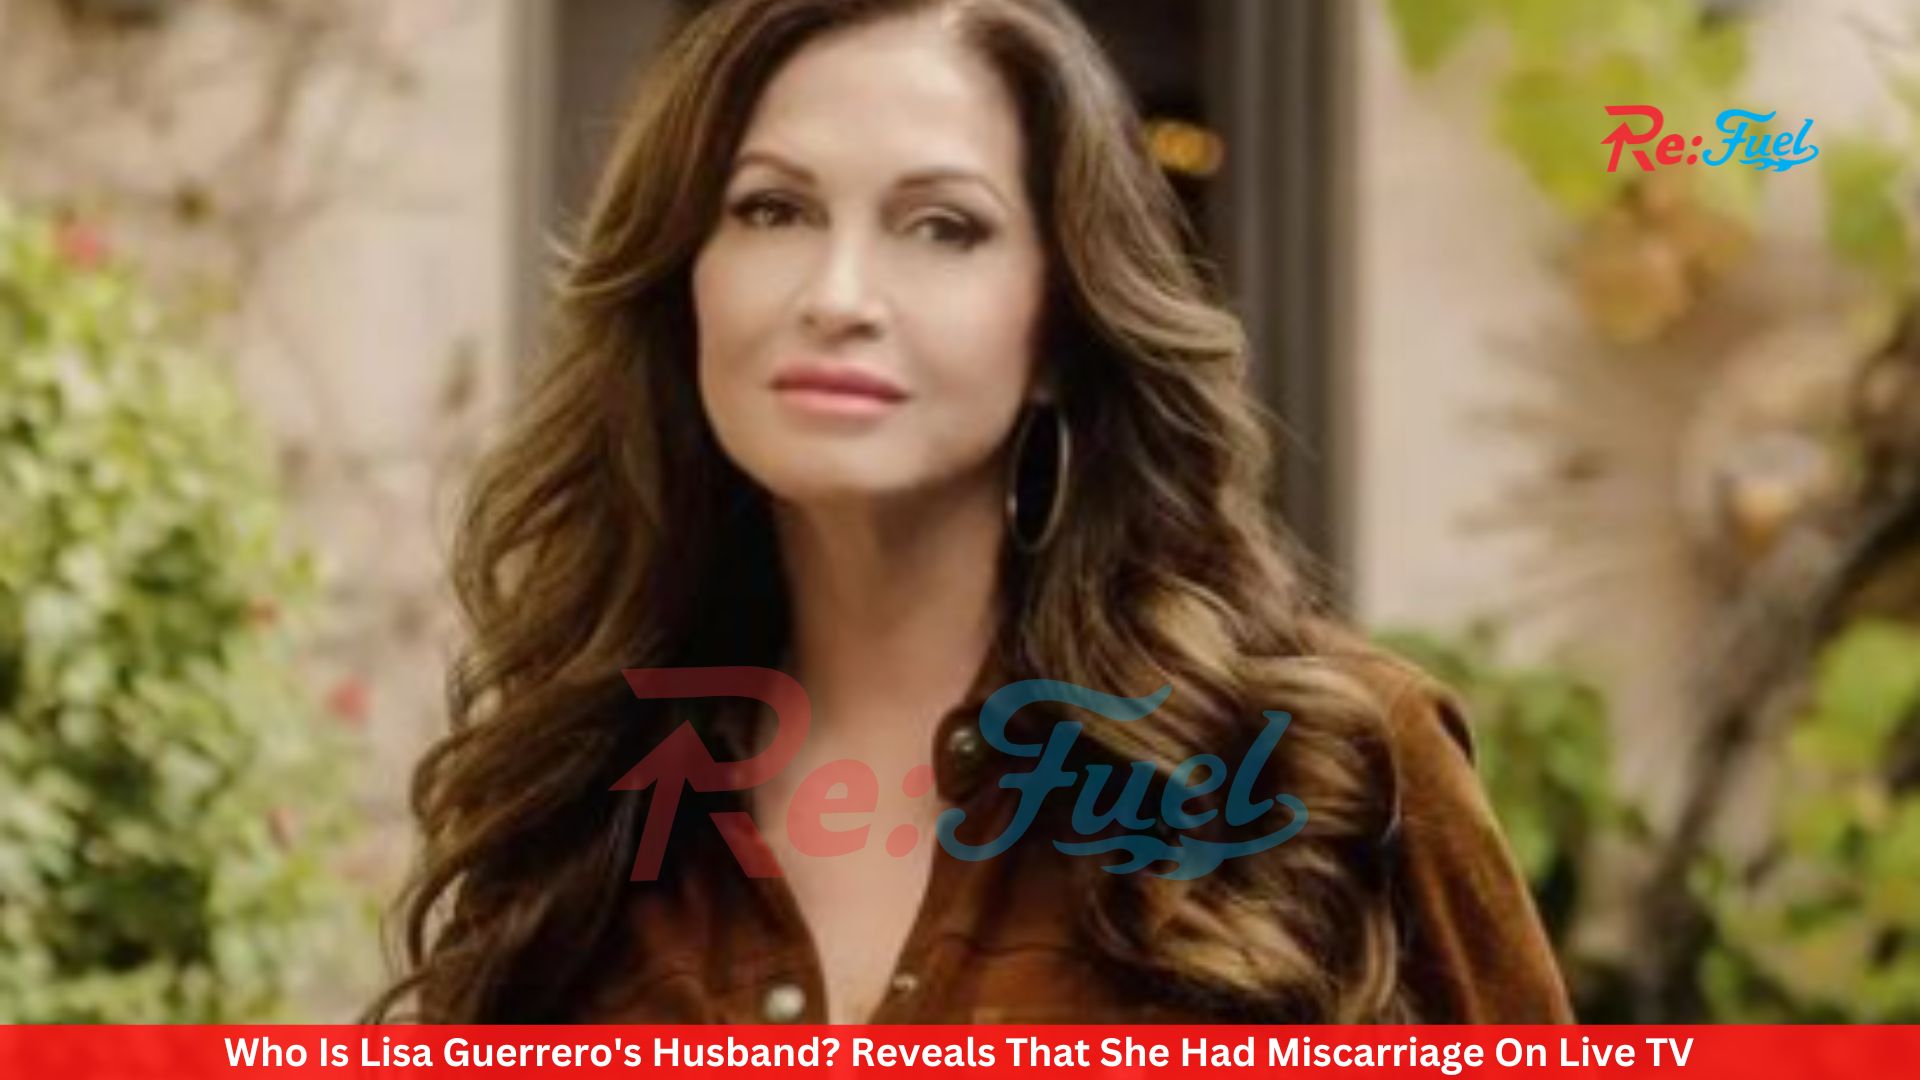 Who Is Lisa Guerrero's Husband? Reveals That She Had Miscarriage On Live TV